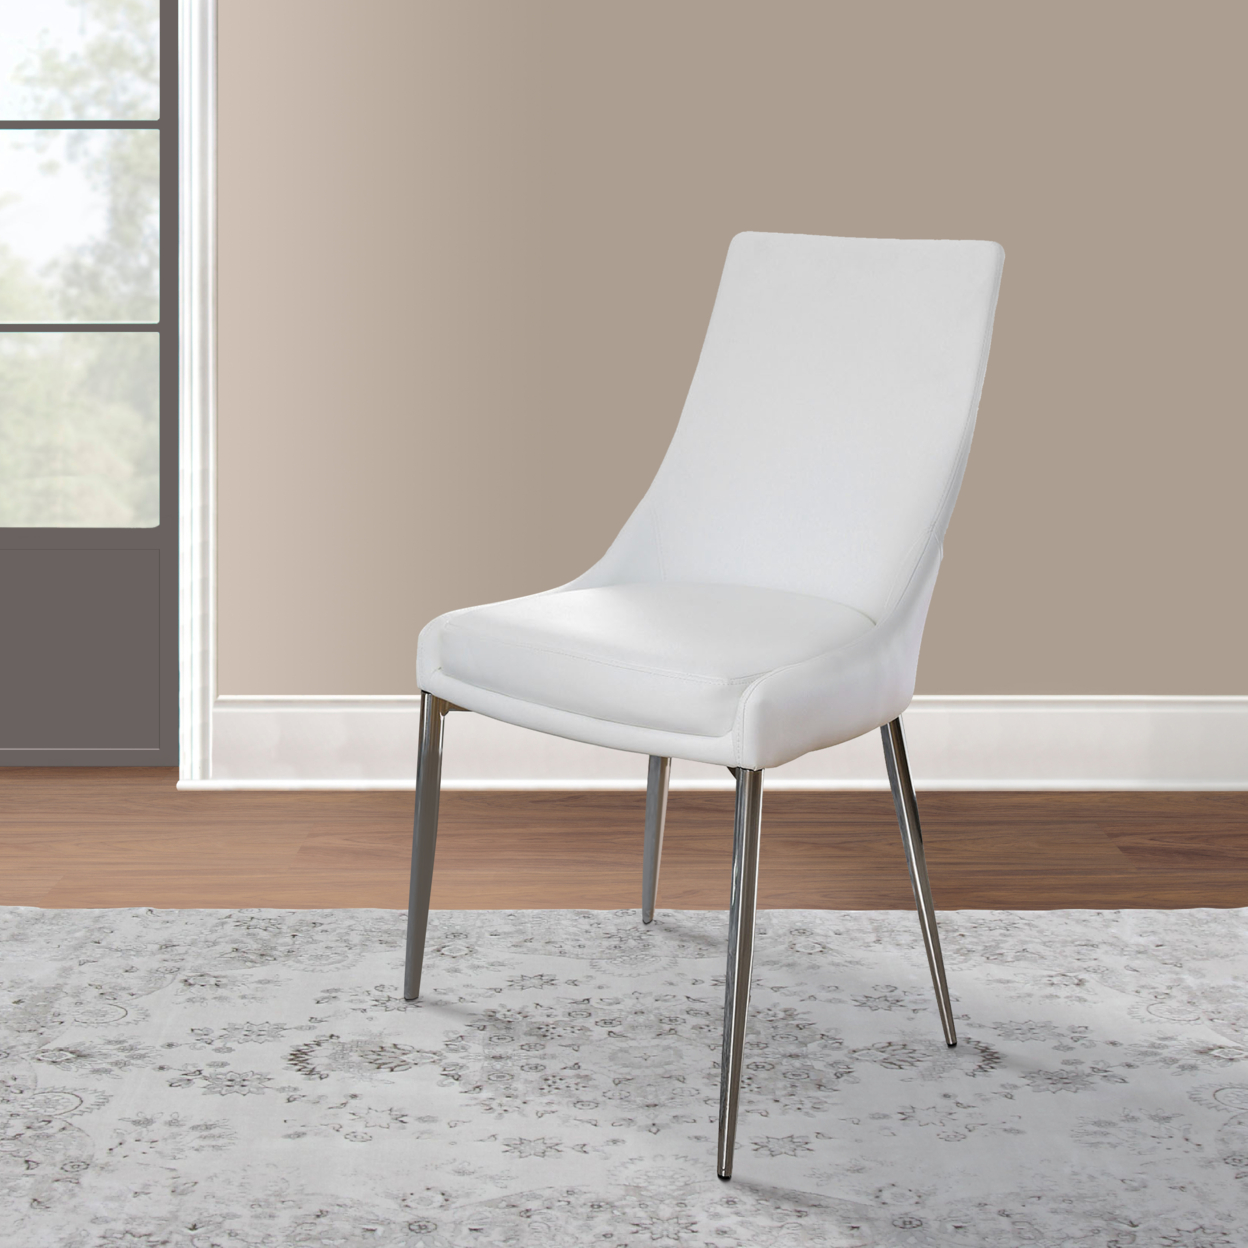 Leatherette Upholstered Metal Side Chair With Tapered Legs, Pack Of Two, White And Silver- Saltoro Sherpi